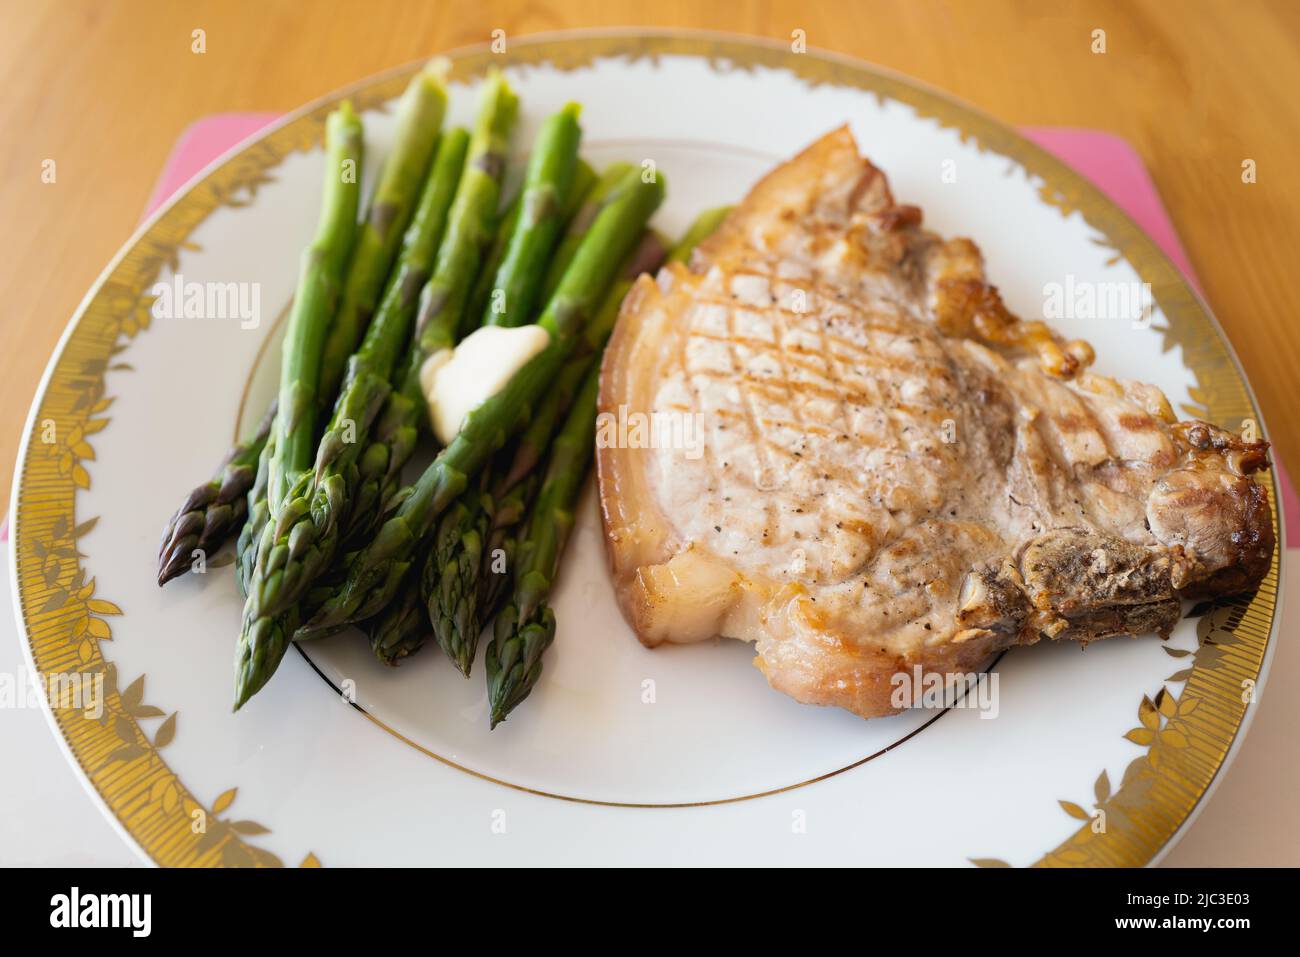 Pork chop and asparagus served with butter on a white plate with a gold trim. Stock Photo